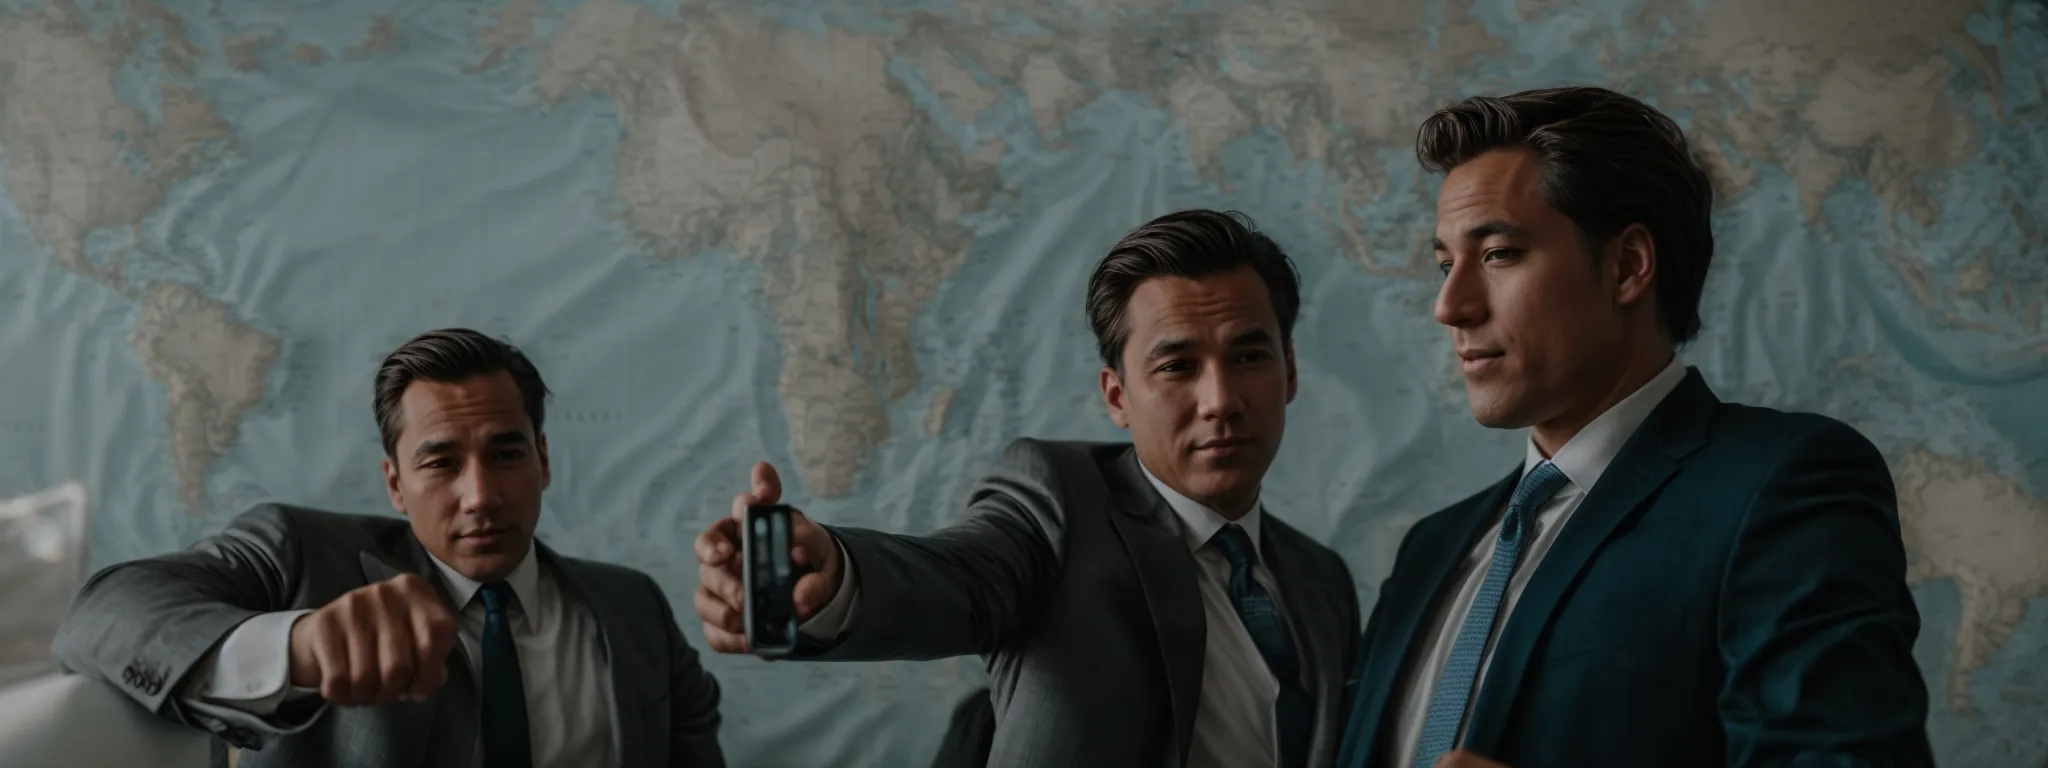 two businessmen pointing at a world map and a city map displayed side by side on a wall.